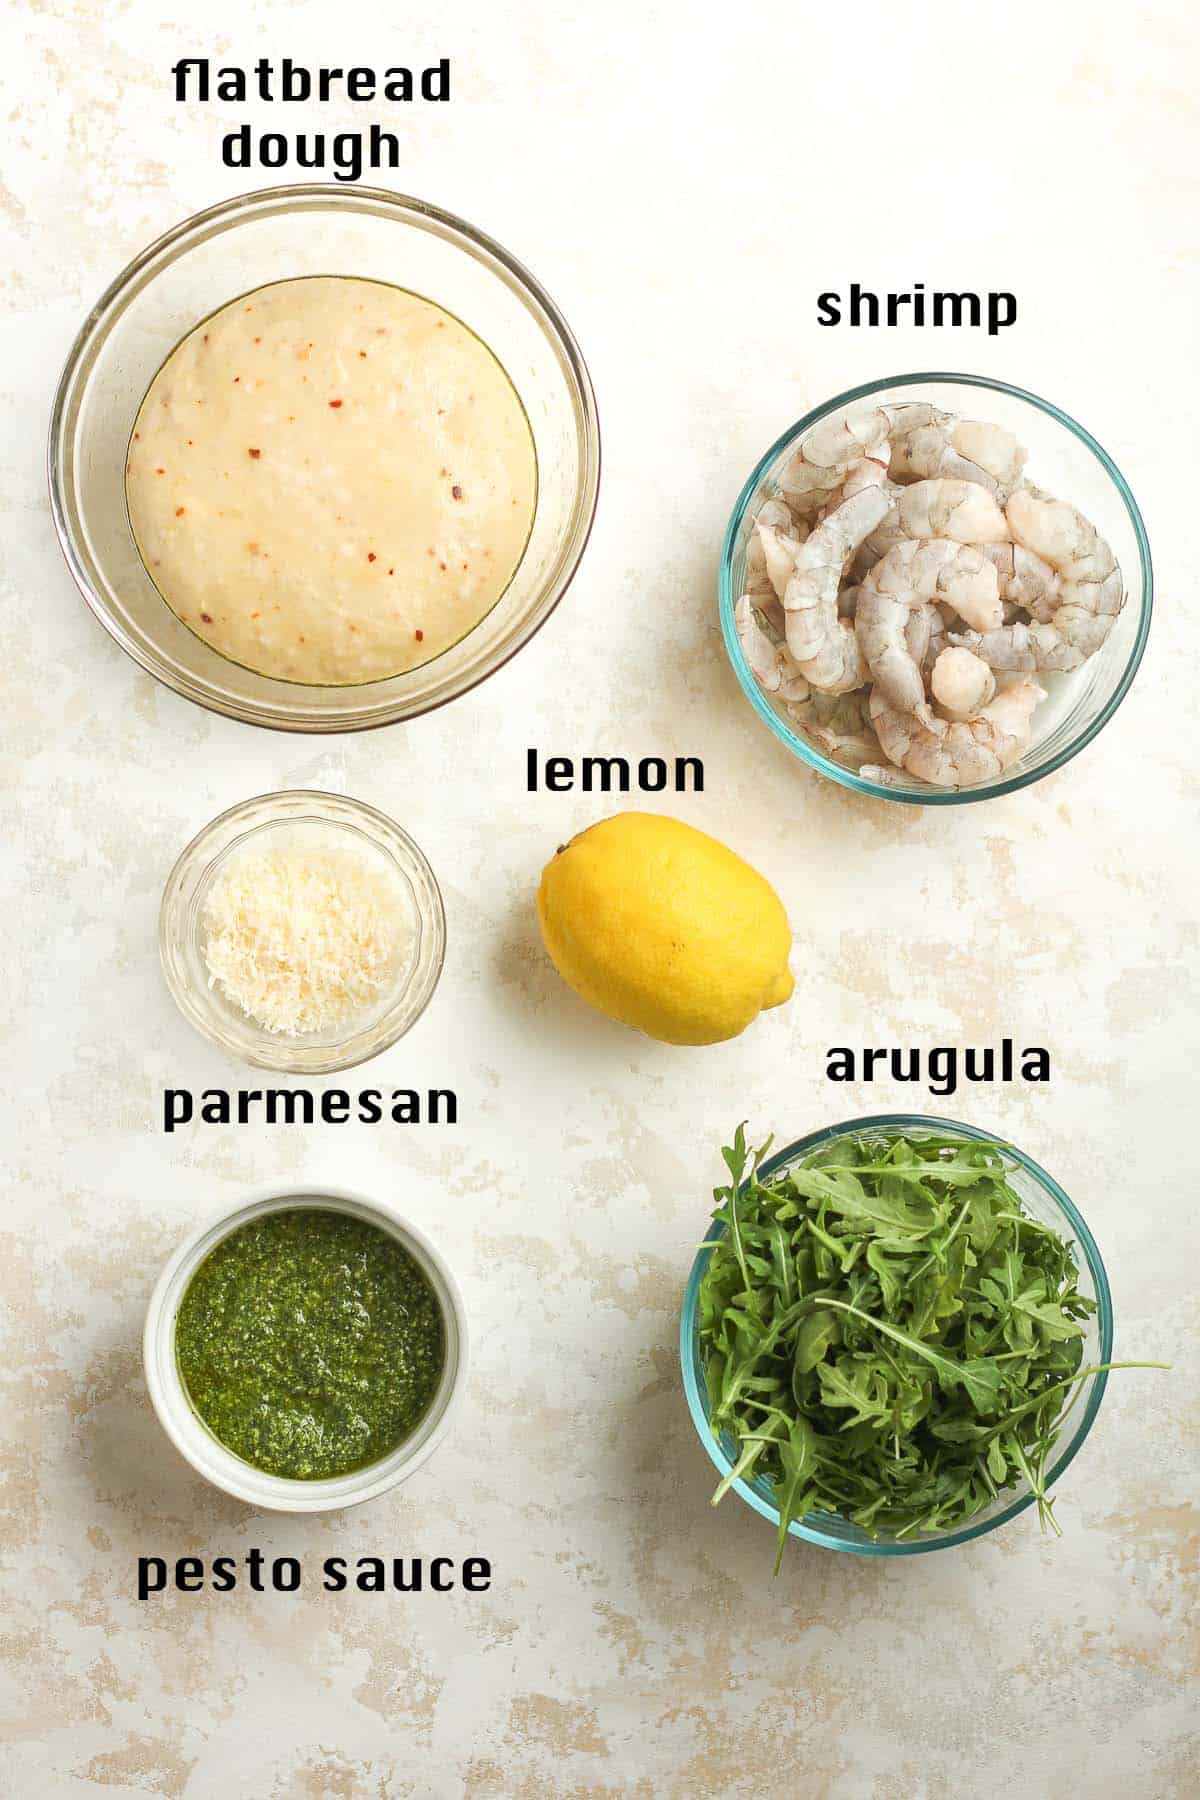 The ingredients for the shrimp pesto flatbread, labeled.